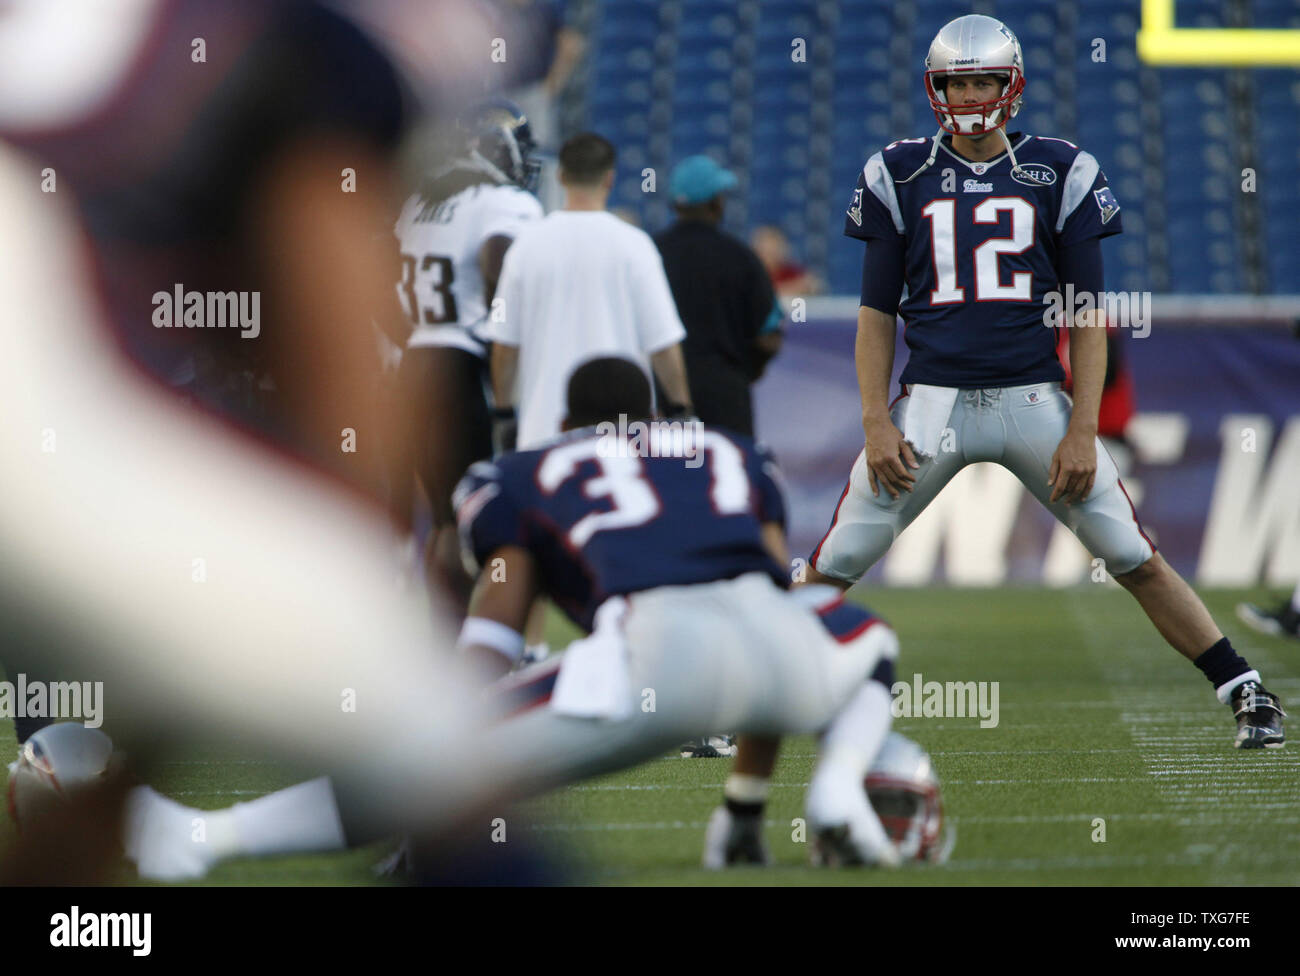 New England Patriots quarterback Tom Brady (12) warms up with his team before a preaseason game against the Jacksonville Jaguars at Gillette Stadium in Foxboro, Massachusetts on August 11, 2011.  UPI/Matthew Healey Stock Photo